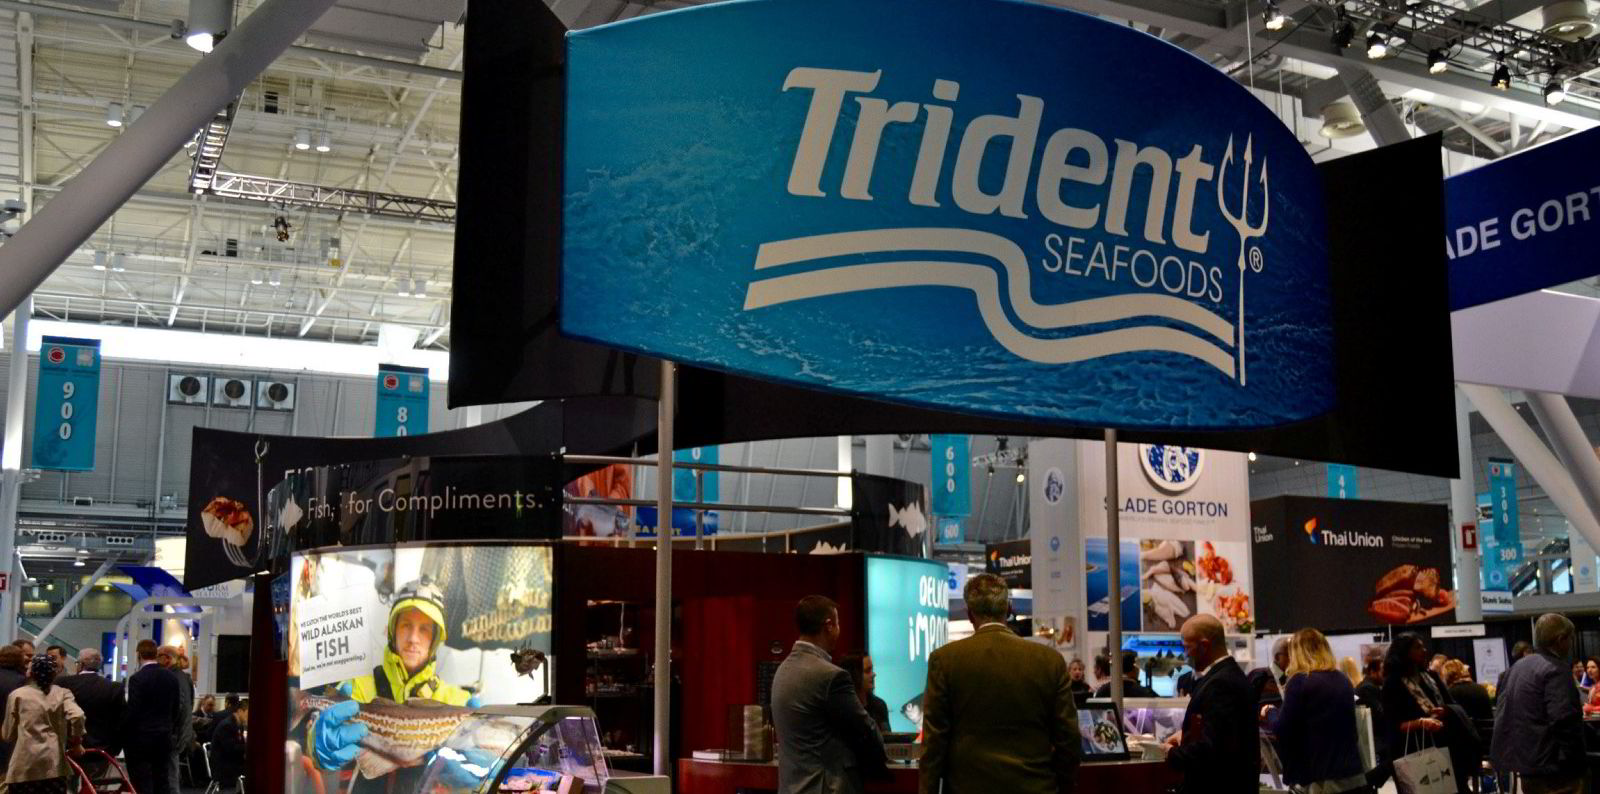 trident seafoods is downsizing its presence at this year's boston seafood show | intrafish.com